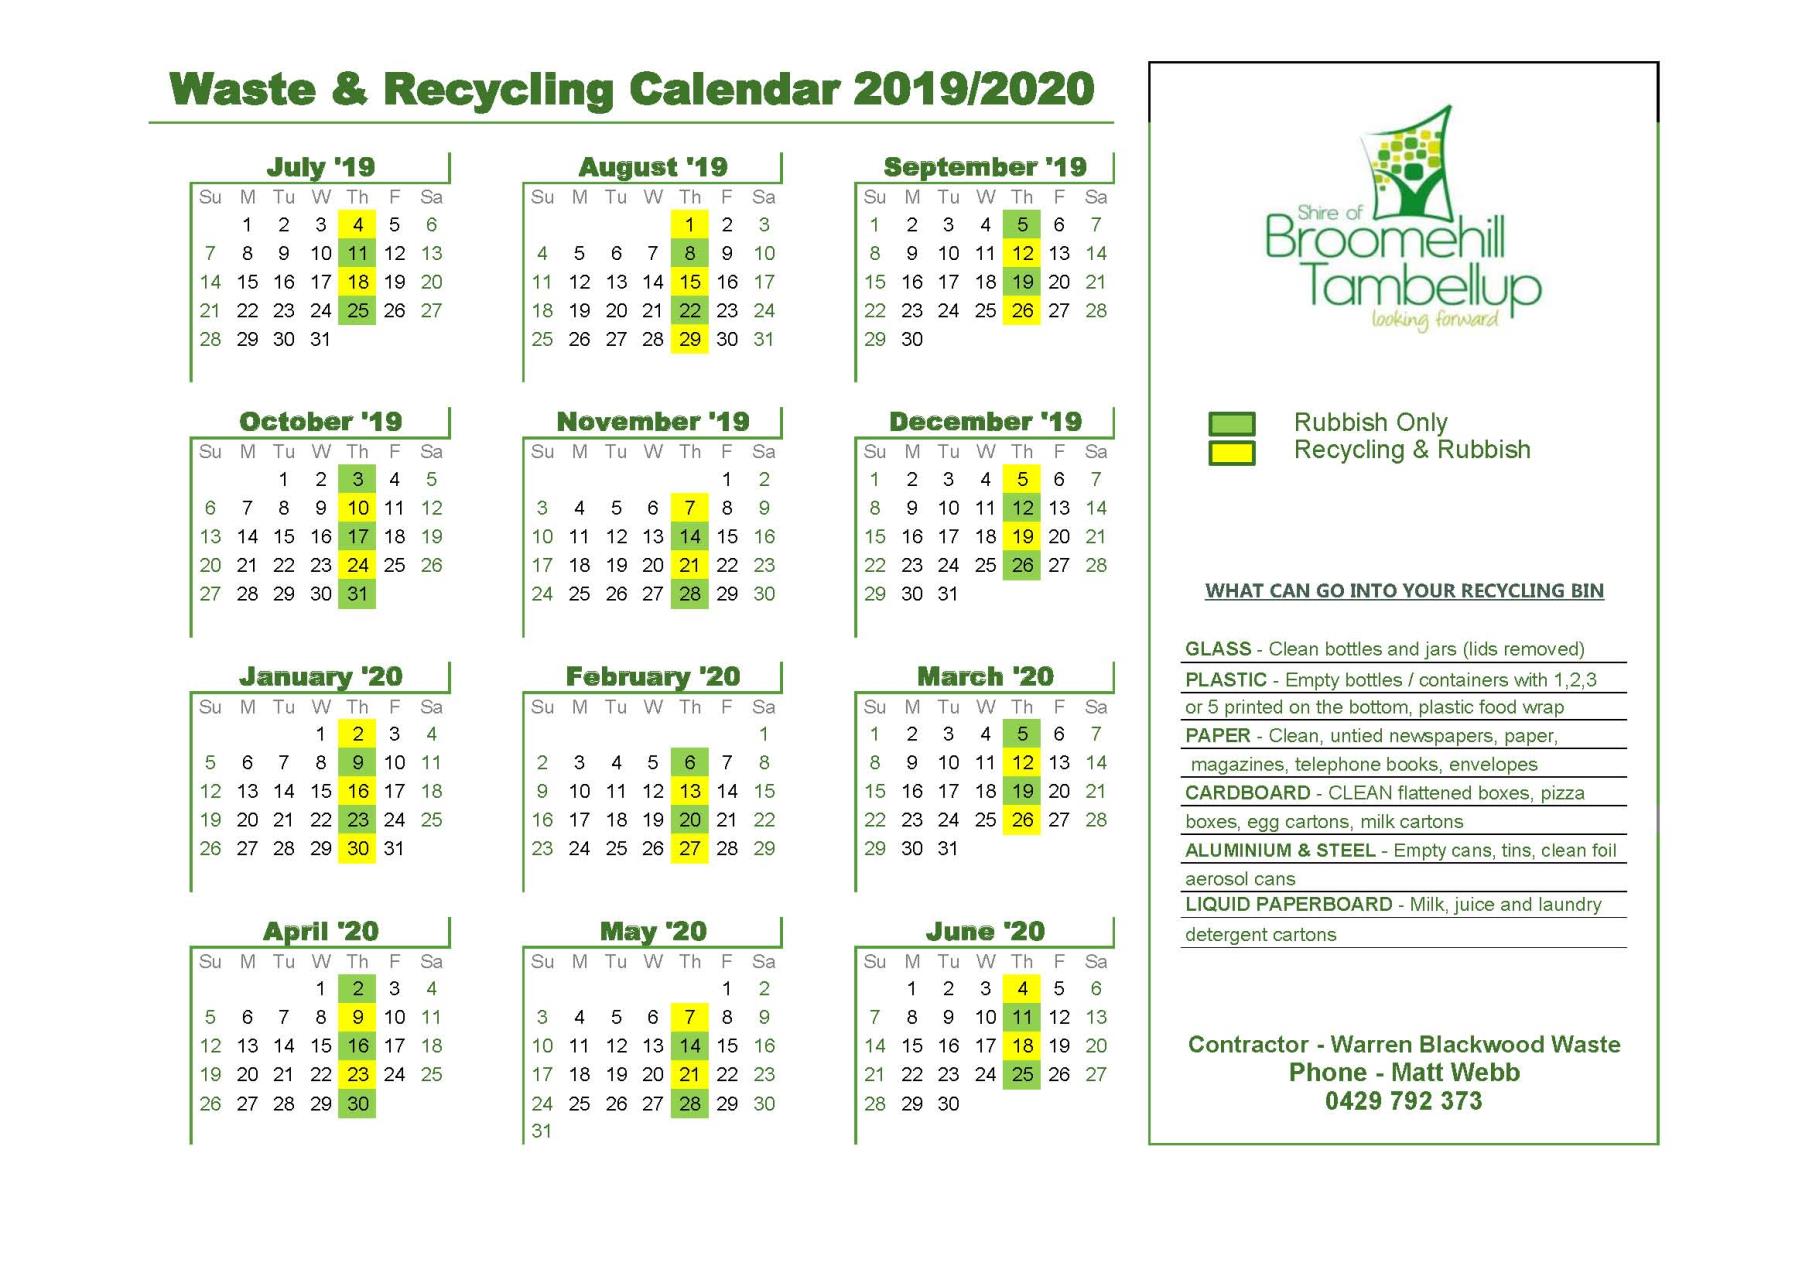 View the Waste & Recycling Calendar 2019/2020 